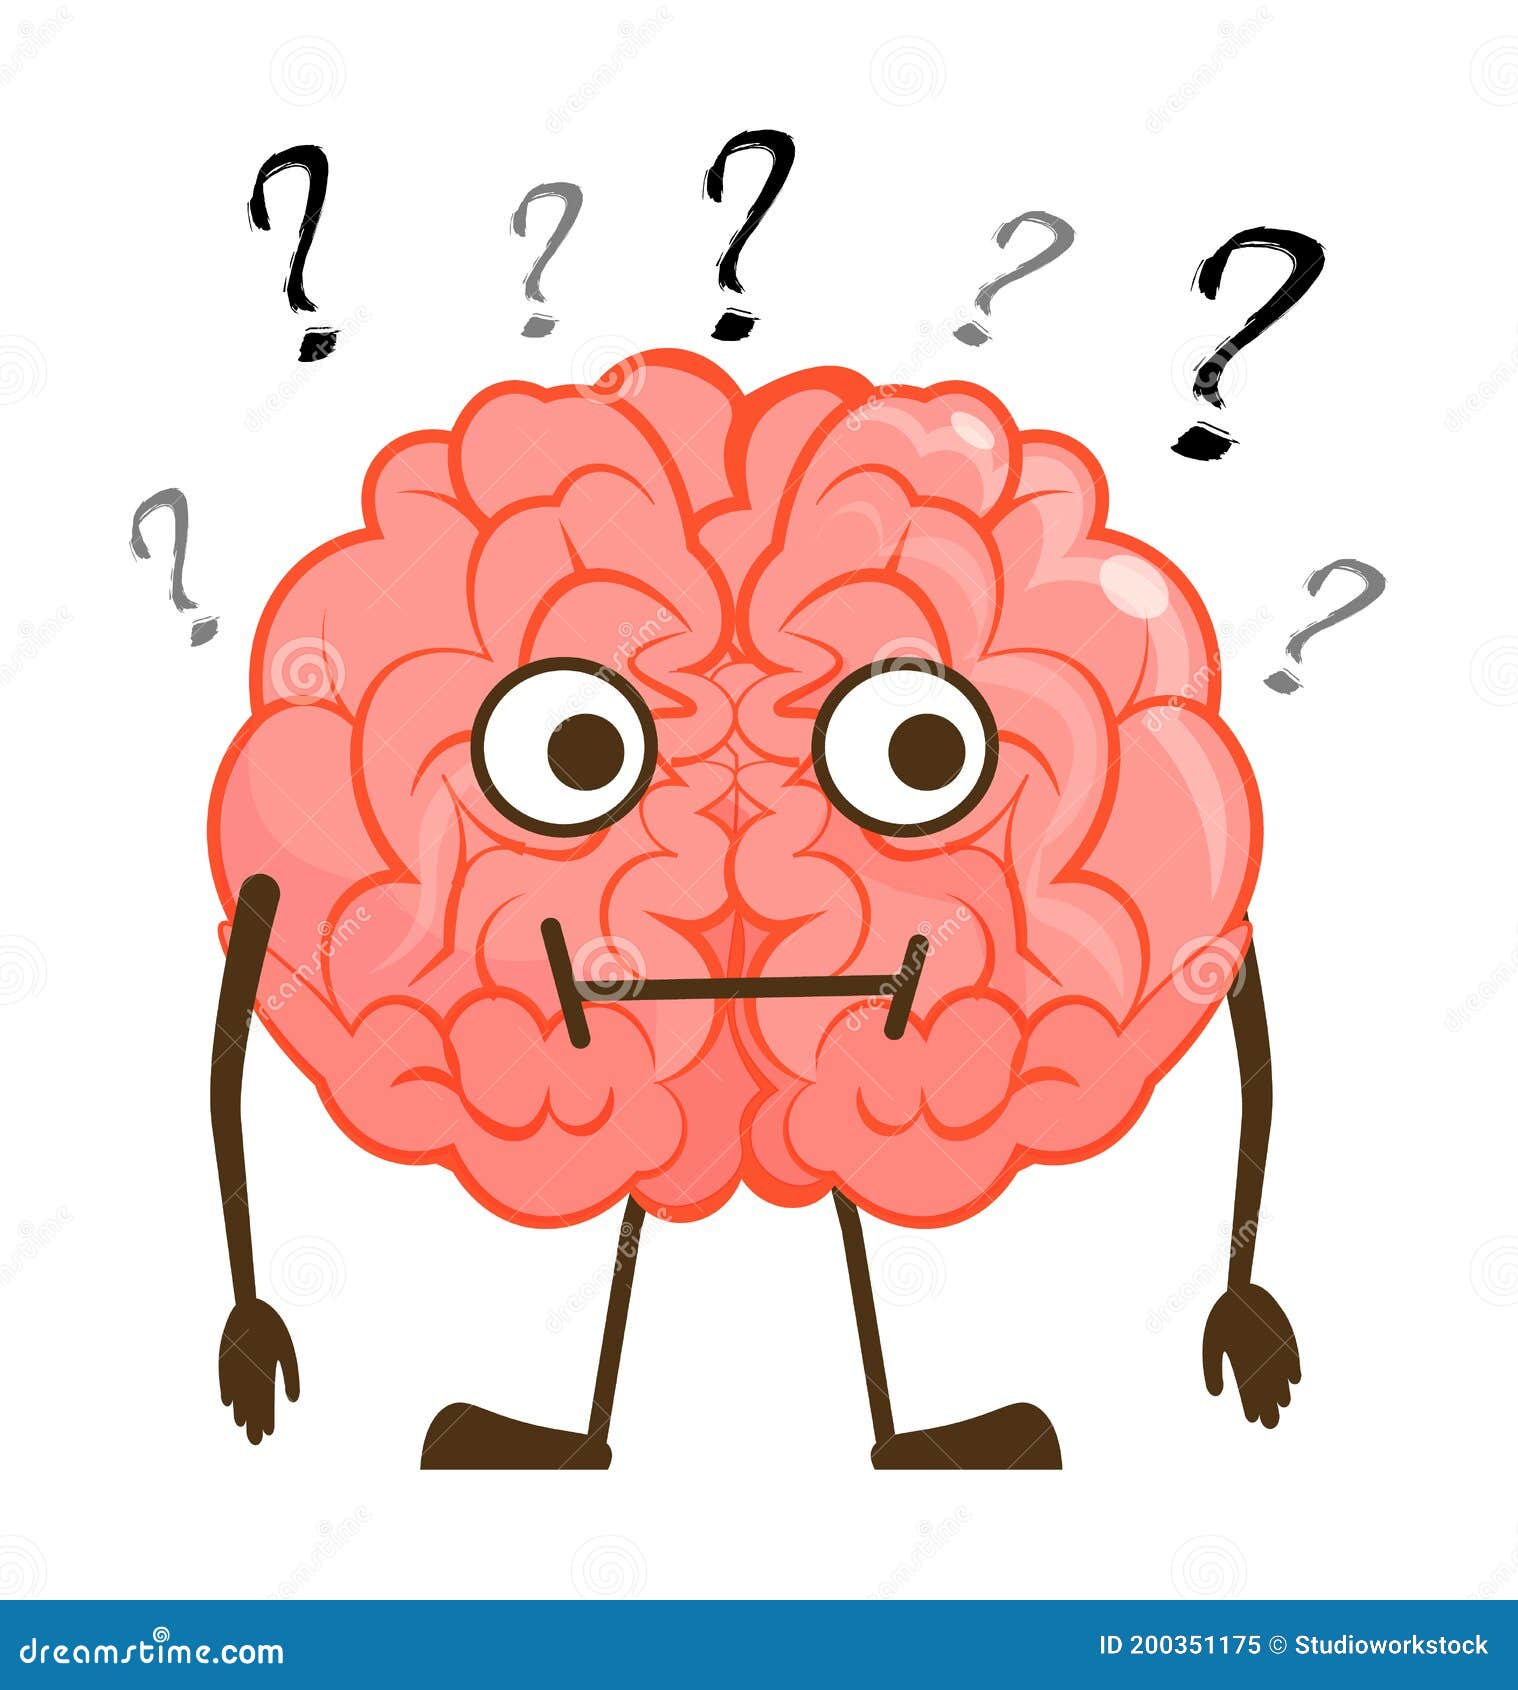 Isolated Questioned Brain Character Cartoon Mascot Stock Vector ...